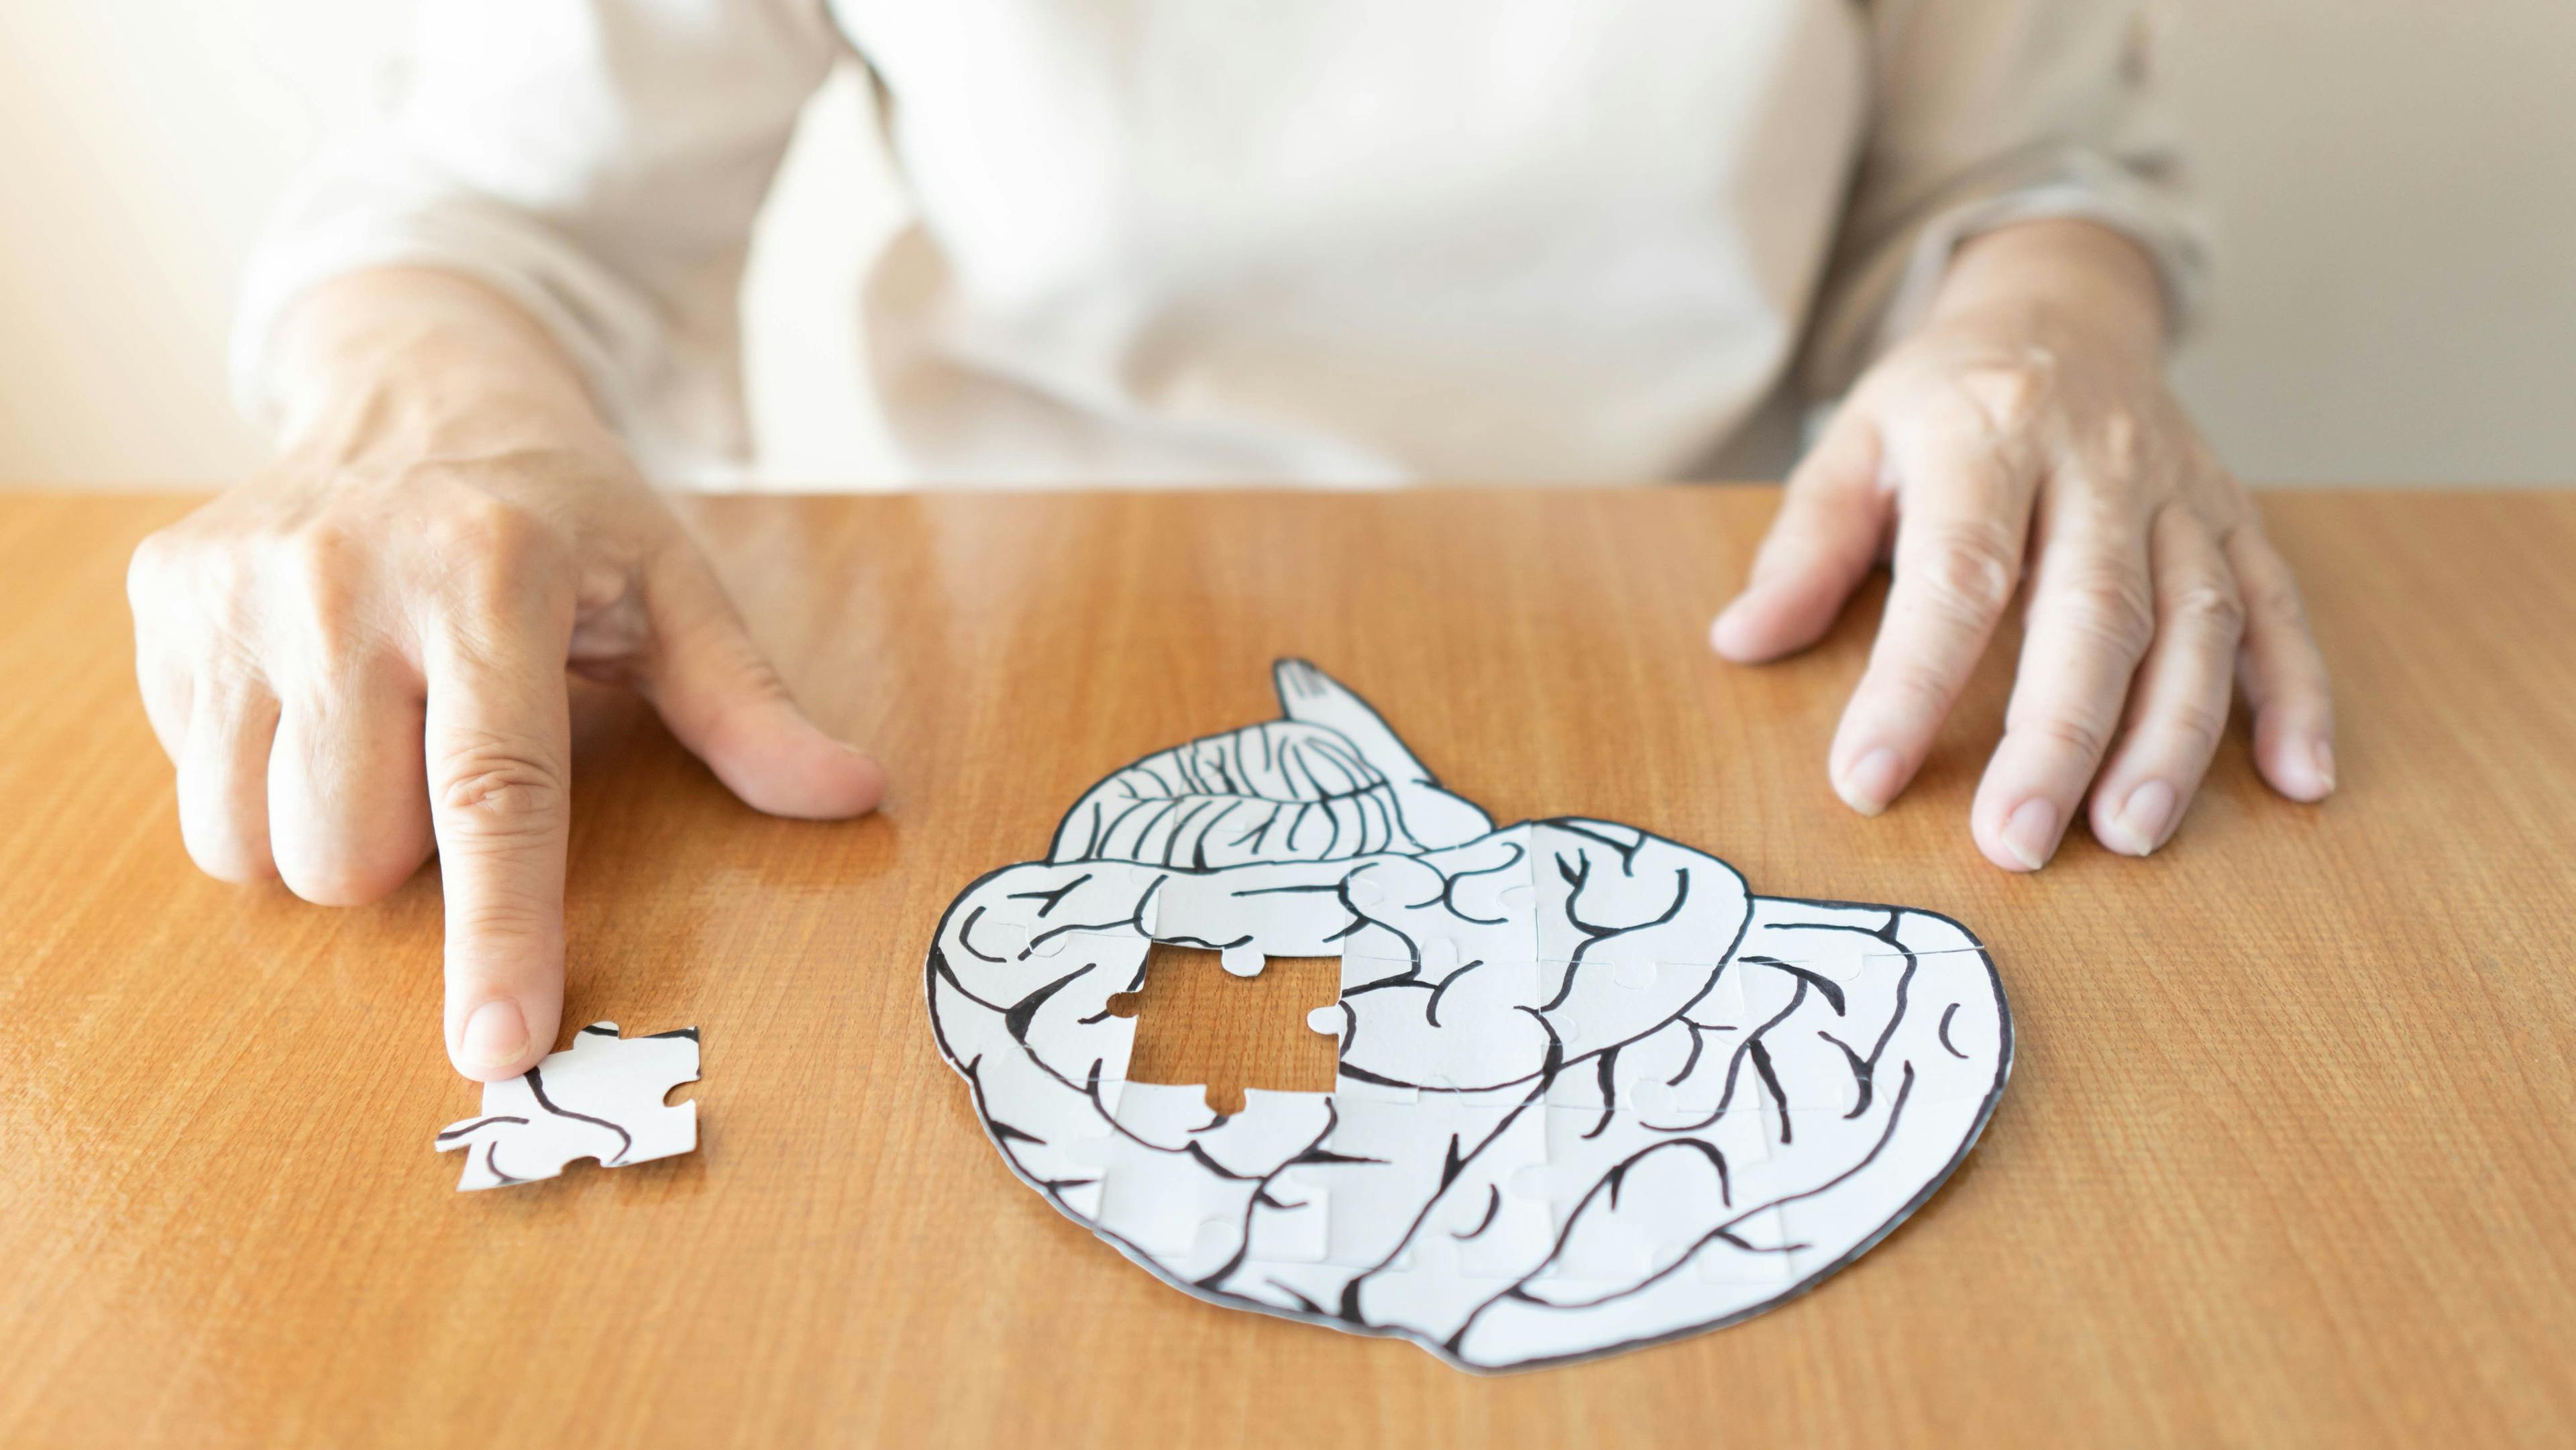 First New Treatment Approved for Alzheimer Disease in Nearly 2 Decades